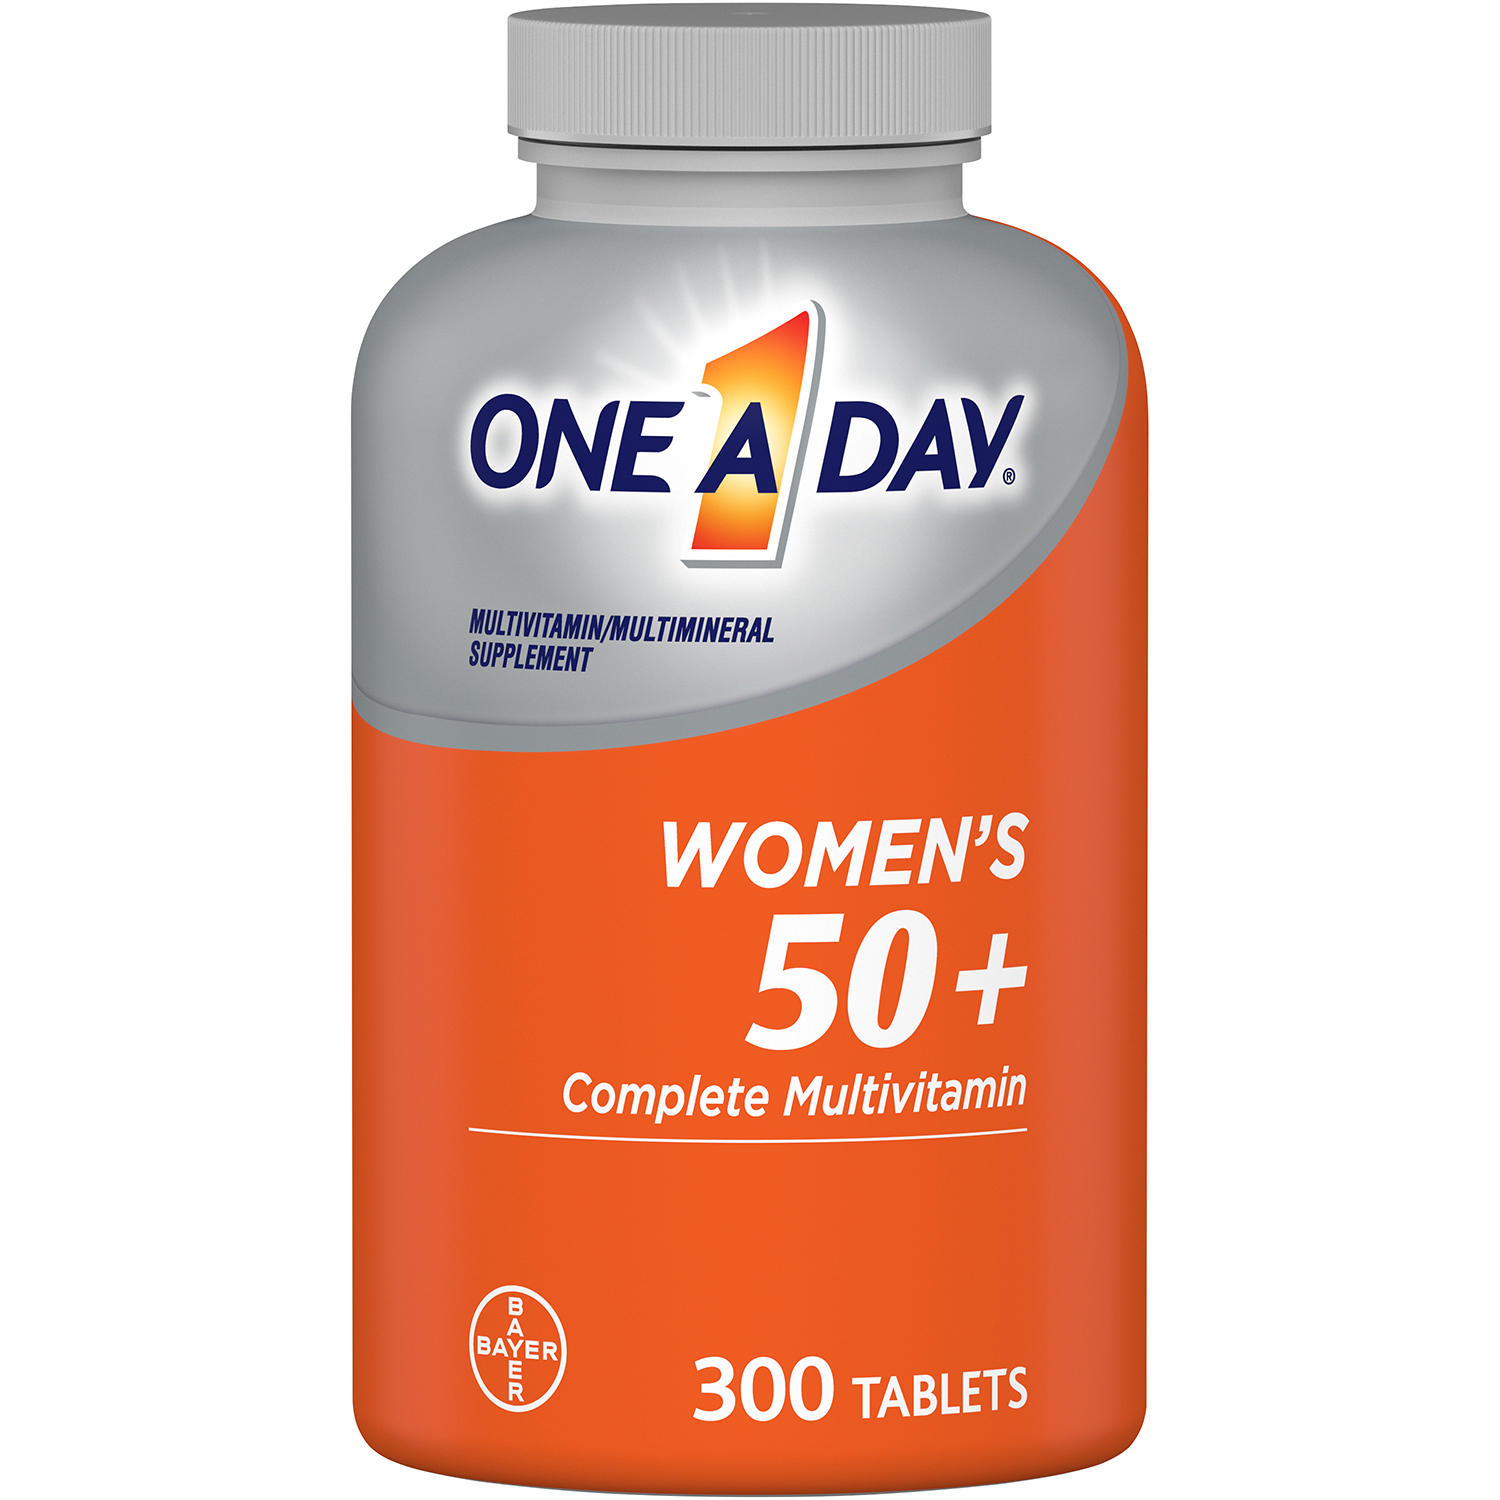 300 Tablets ONE A DAY Women’s MULTIVITAMIN/MULTIMINERAL Supplement